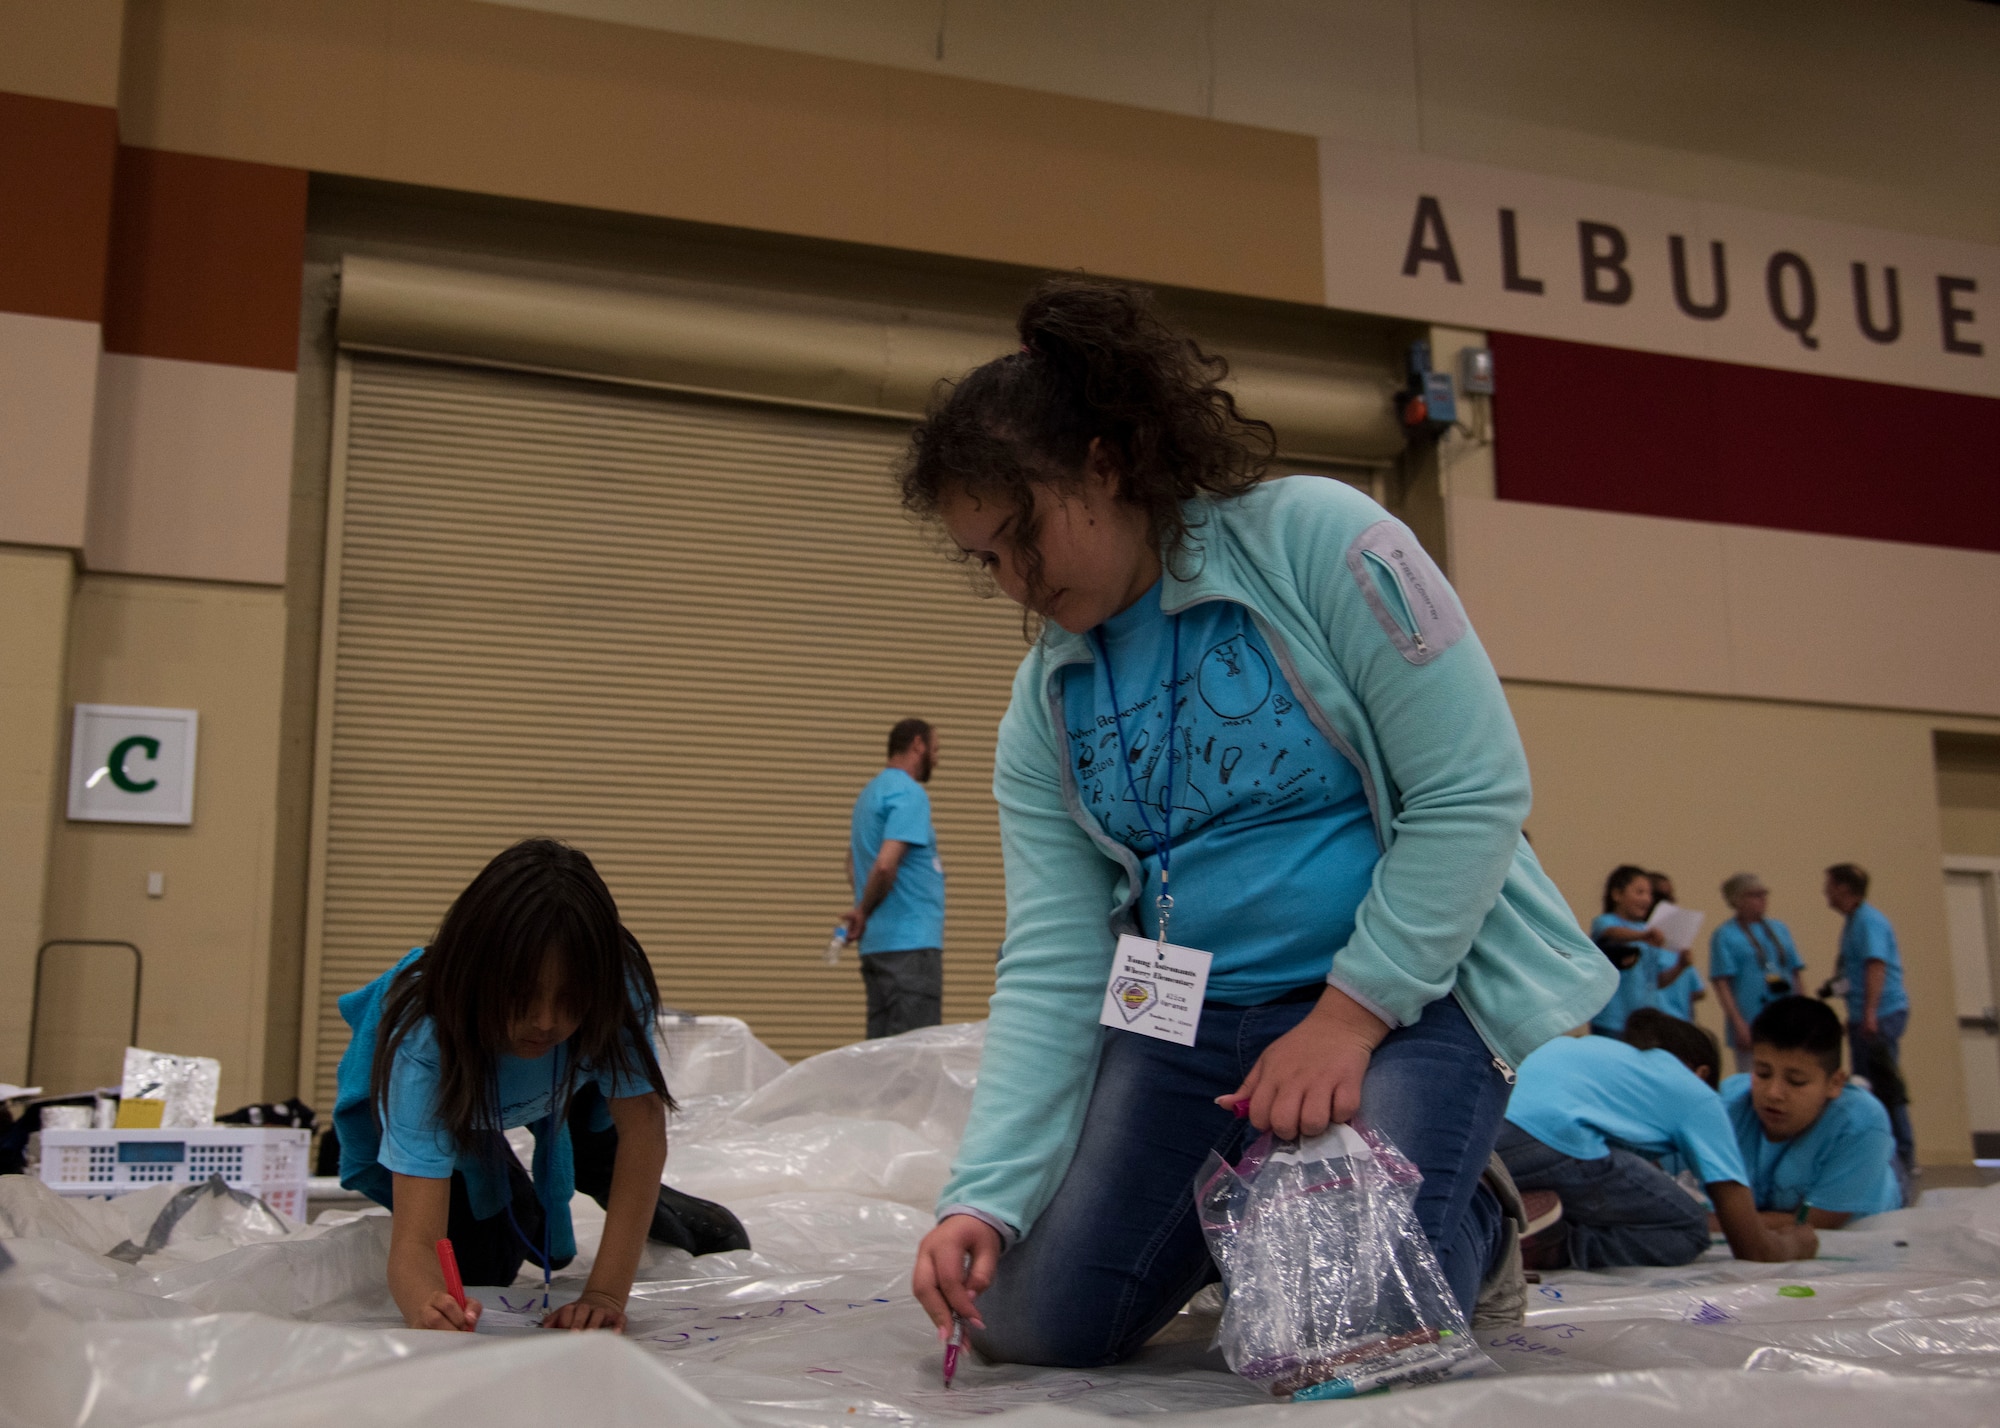 Students from local Albuquerque schools participate in Air Force Research Lab's Mission to Mars at the Albuquerque Convention Center in Albuquerque, N.M., April 20. The Mars Missions flight provides fifth grade students an opportunity to plan and carry out a simulated manned mission to Mars, their objective is to build a colony of habitats that can sustain life.